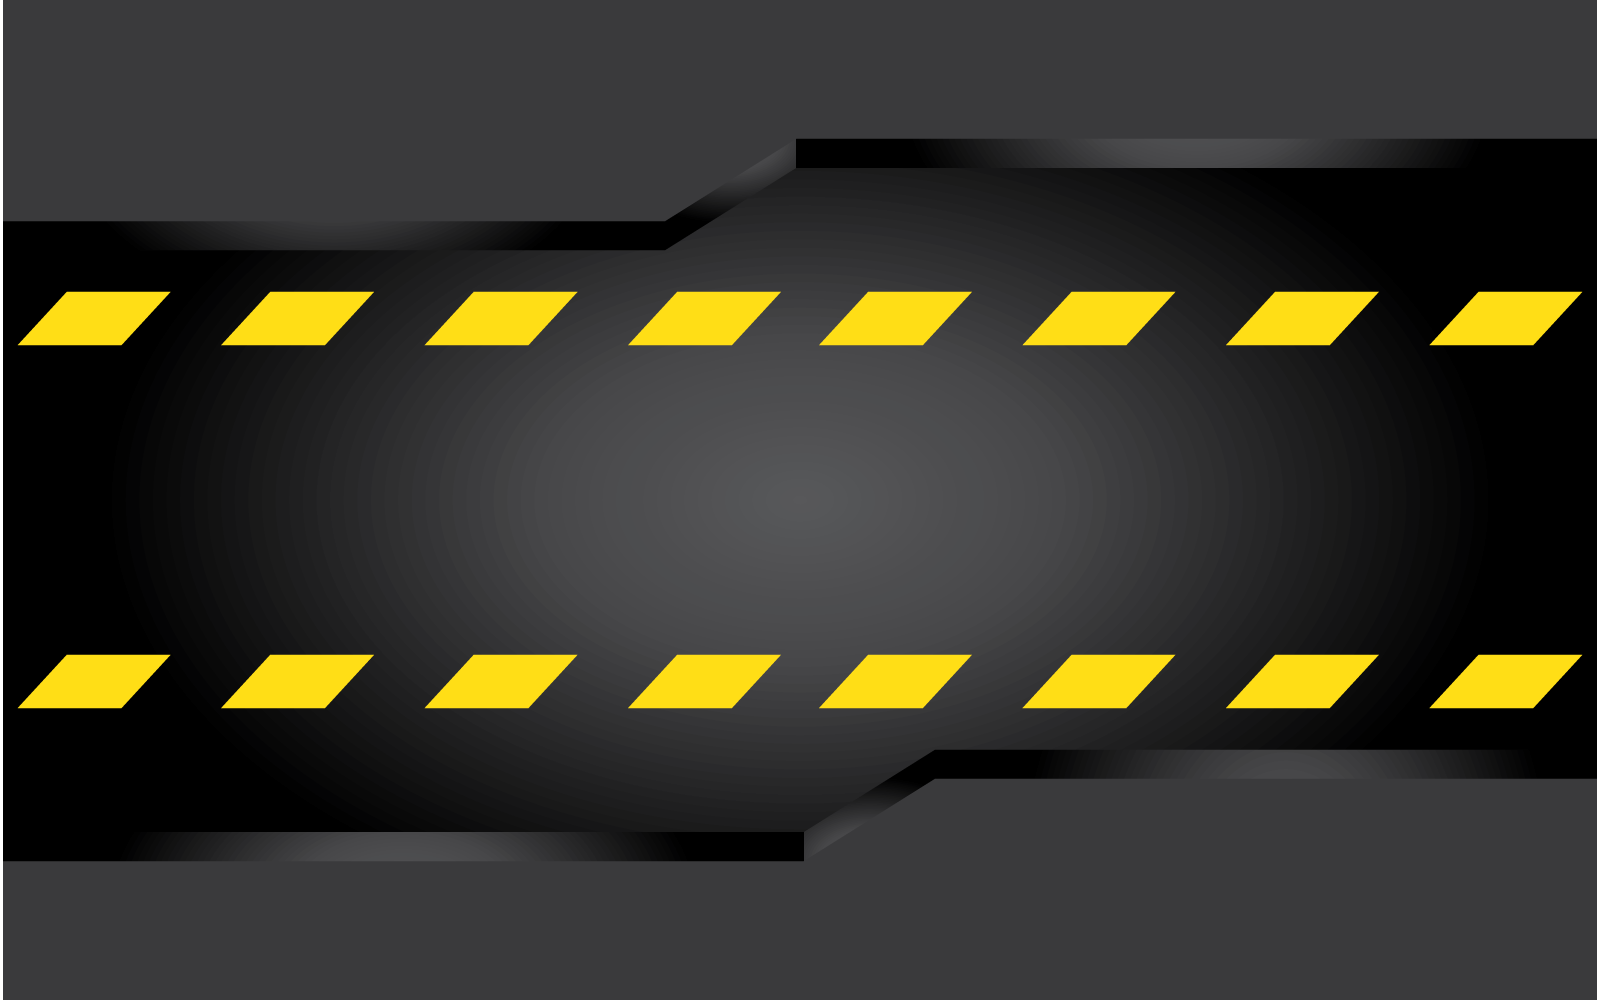 Construction metal background with black and yellow safety line design template